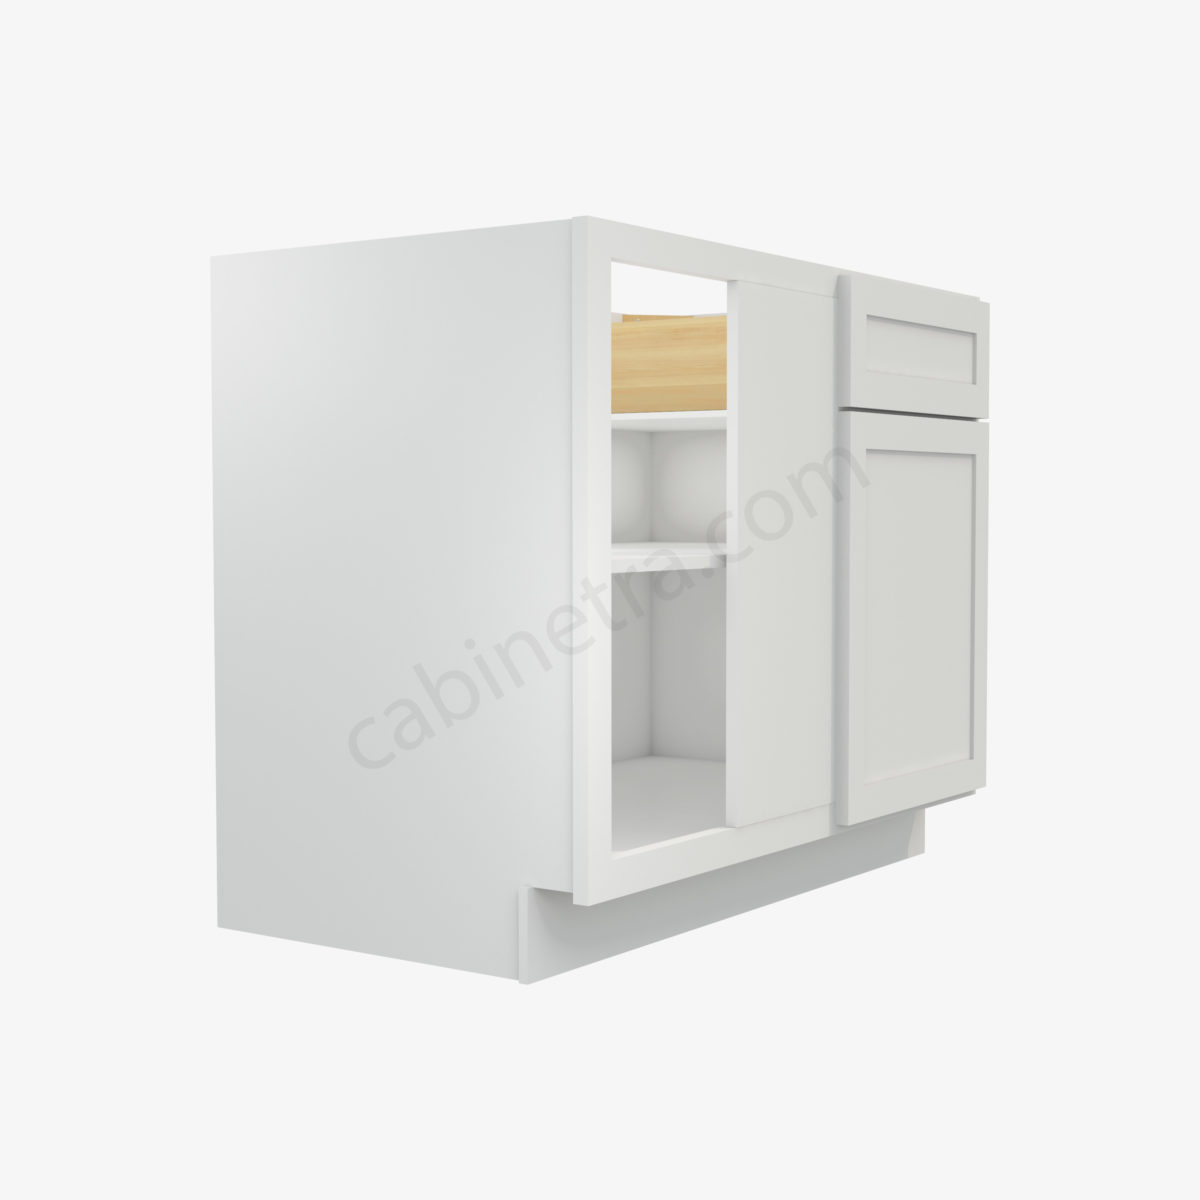 AW BBLC42 45 39W 4 Forevermark Ice White Shaker Cabinetra scaled